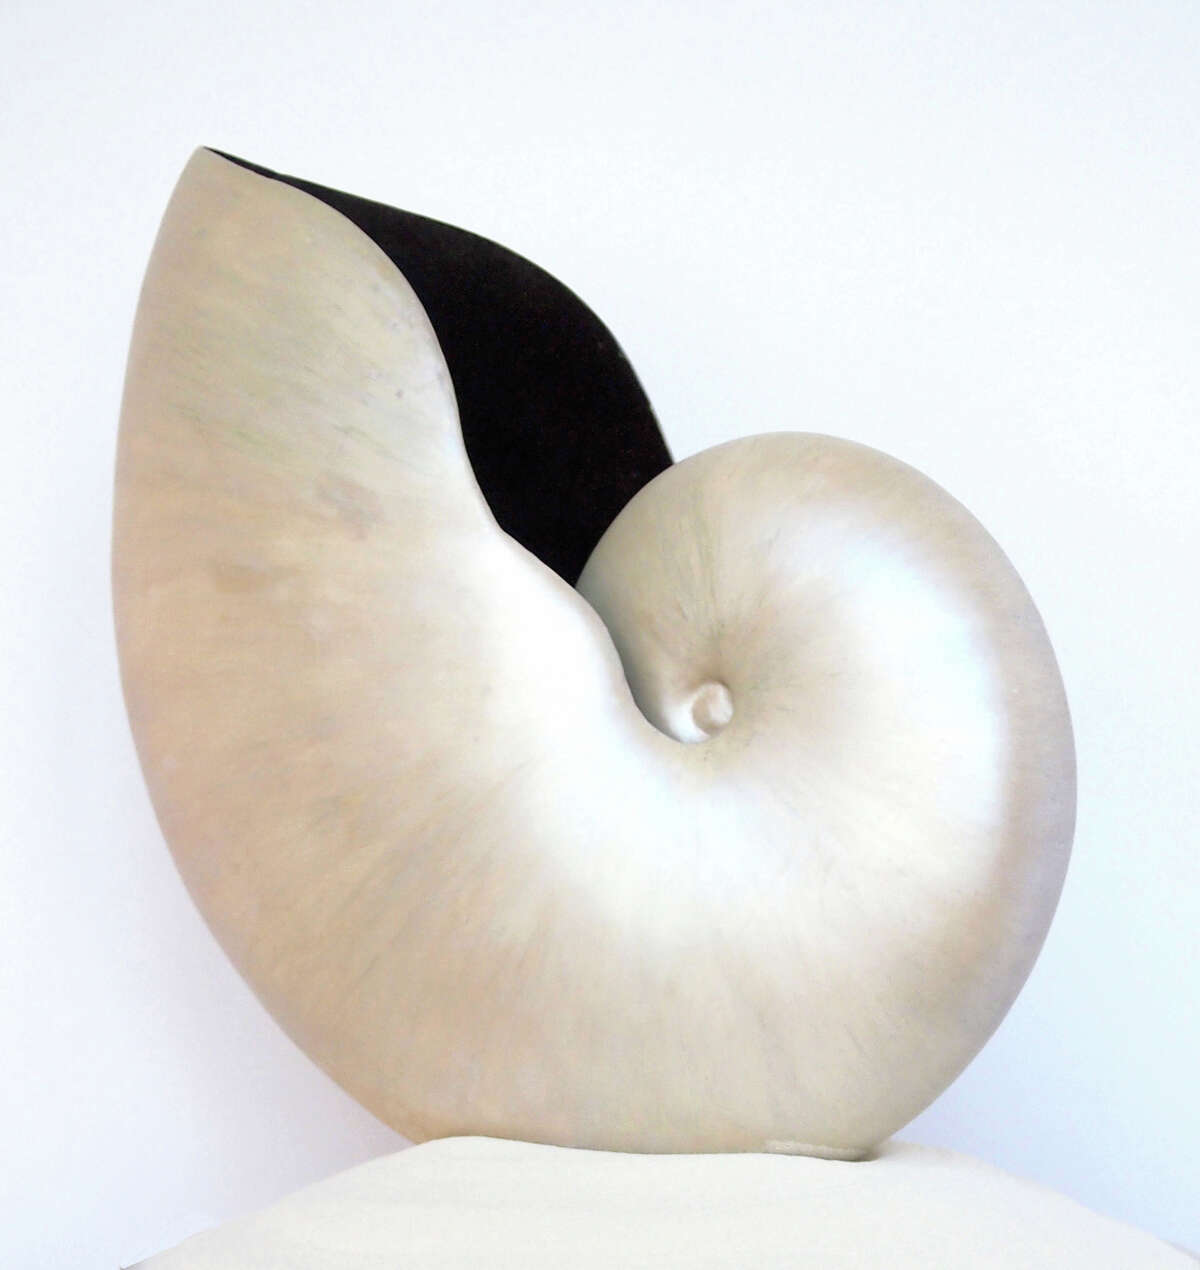 Lone Star College-CyFair Art Department presents artist Cintia Rico with "Around Beauty" now through June 3 in the Bosque Gallery. The exhibit celebrates the beauty of curves This artwork is called "Golden Spiral."